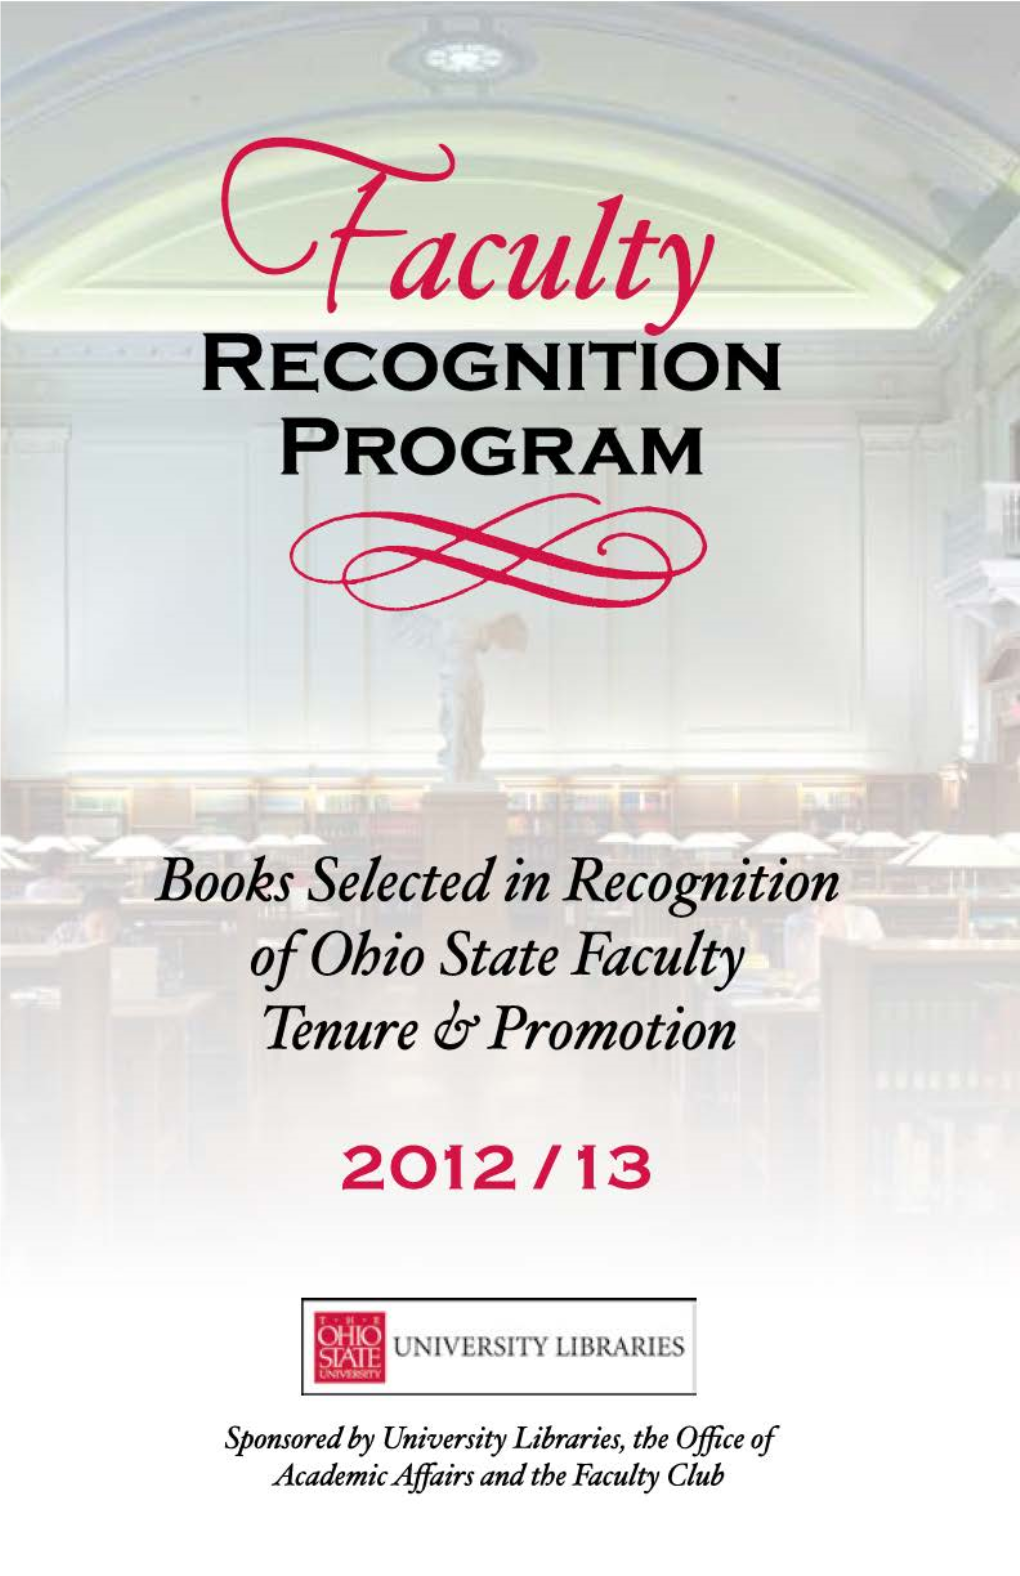 Tjculty __ RECOGNITION PROGRAM Cess;~